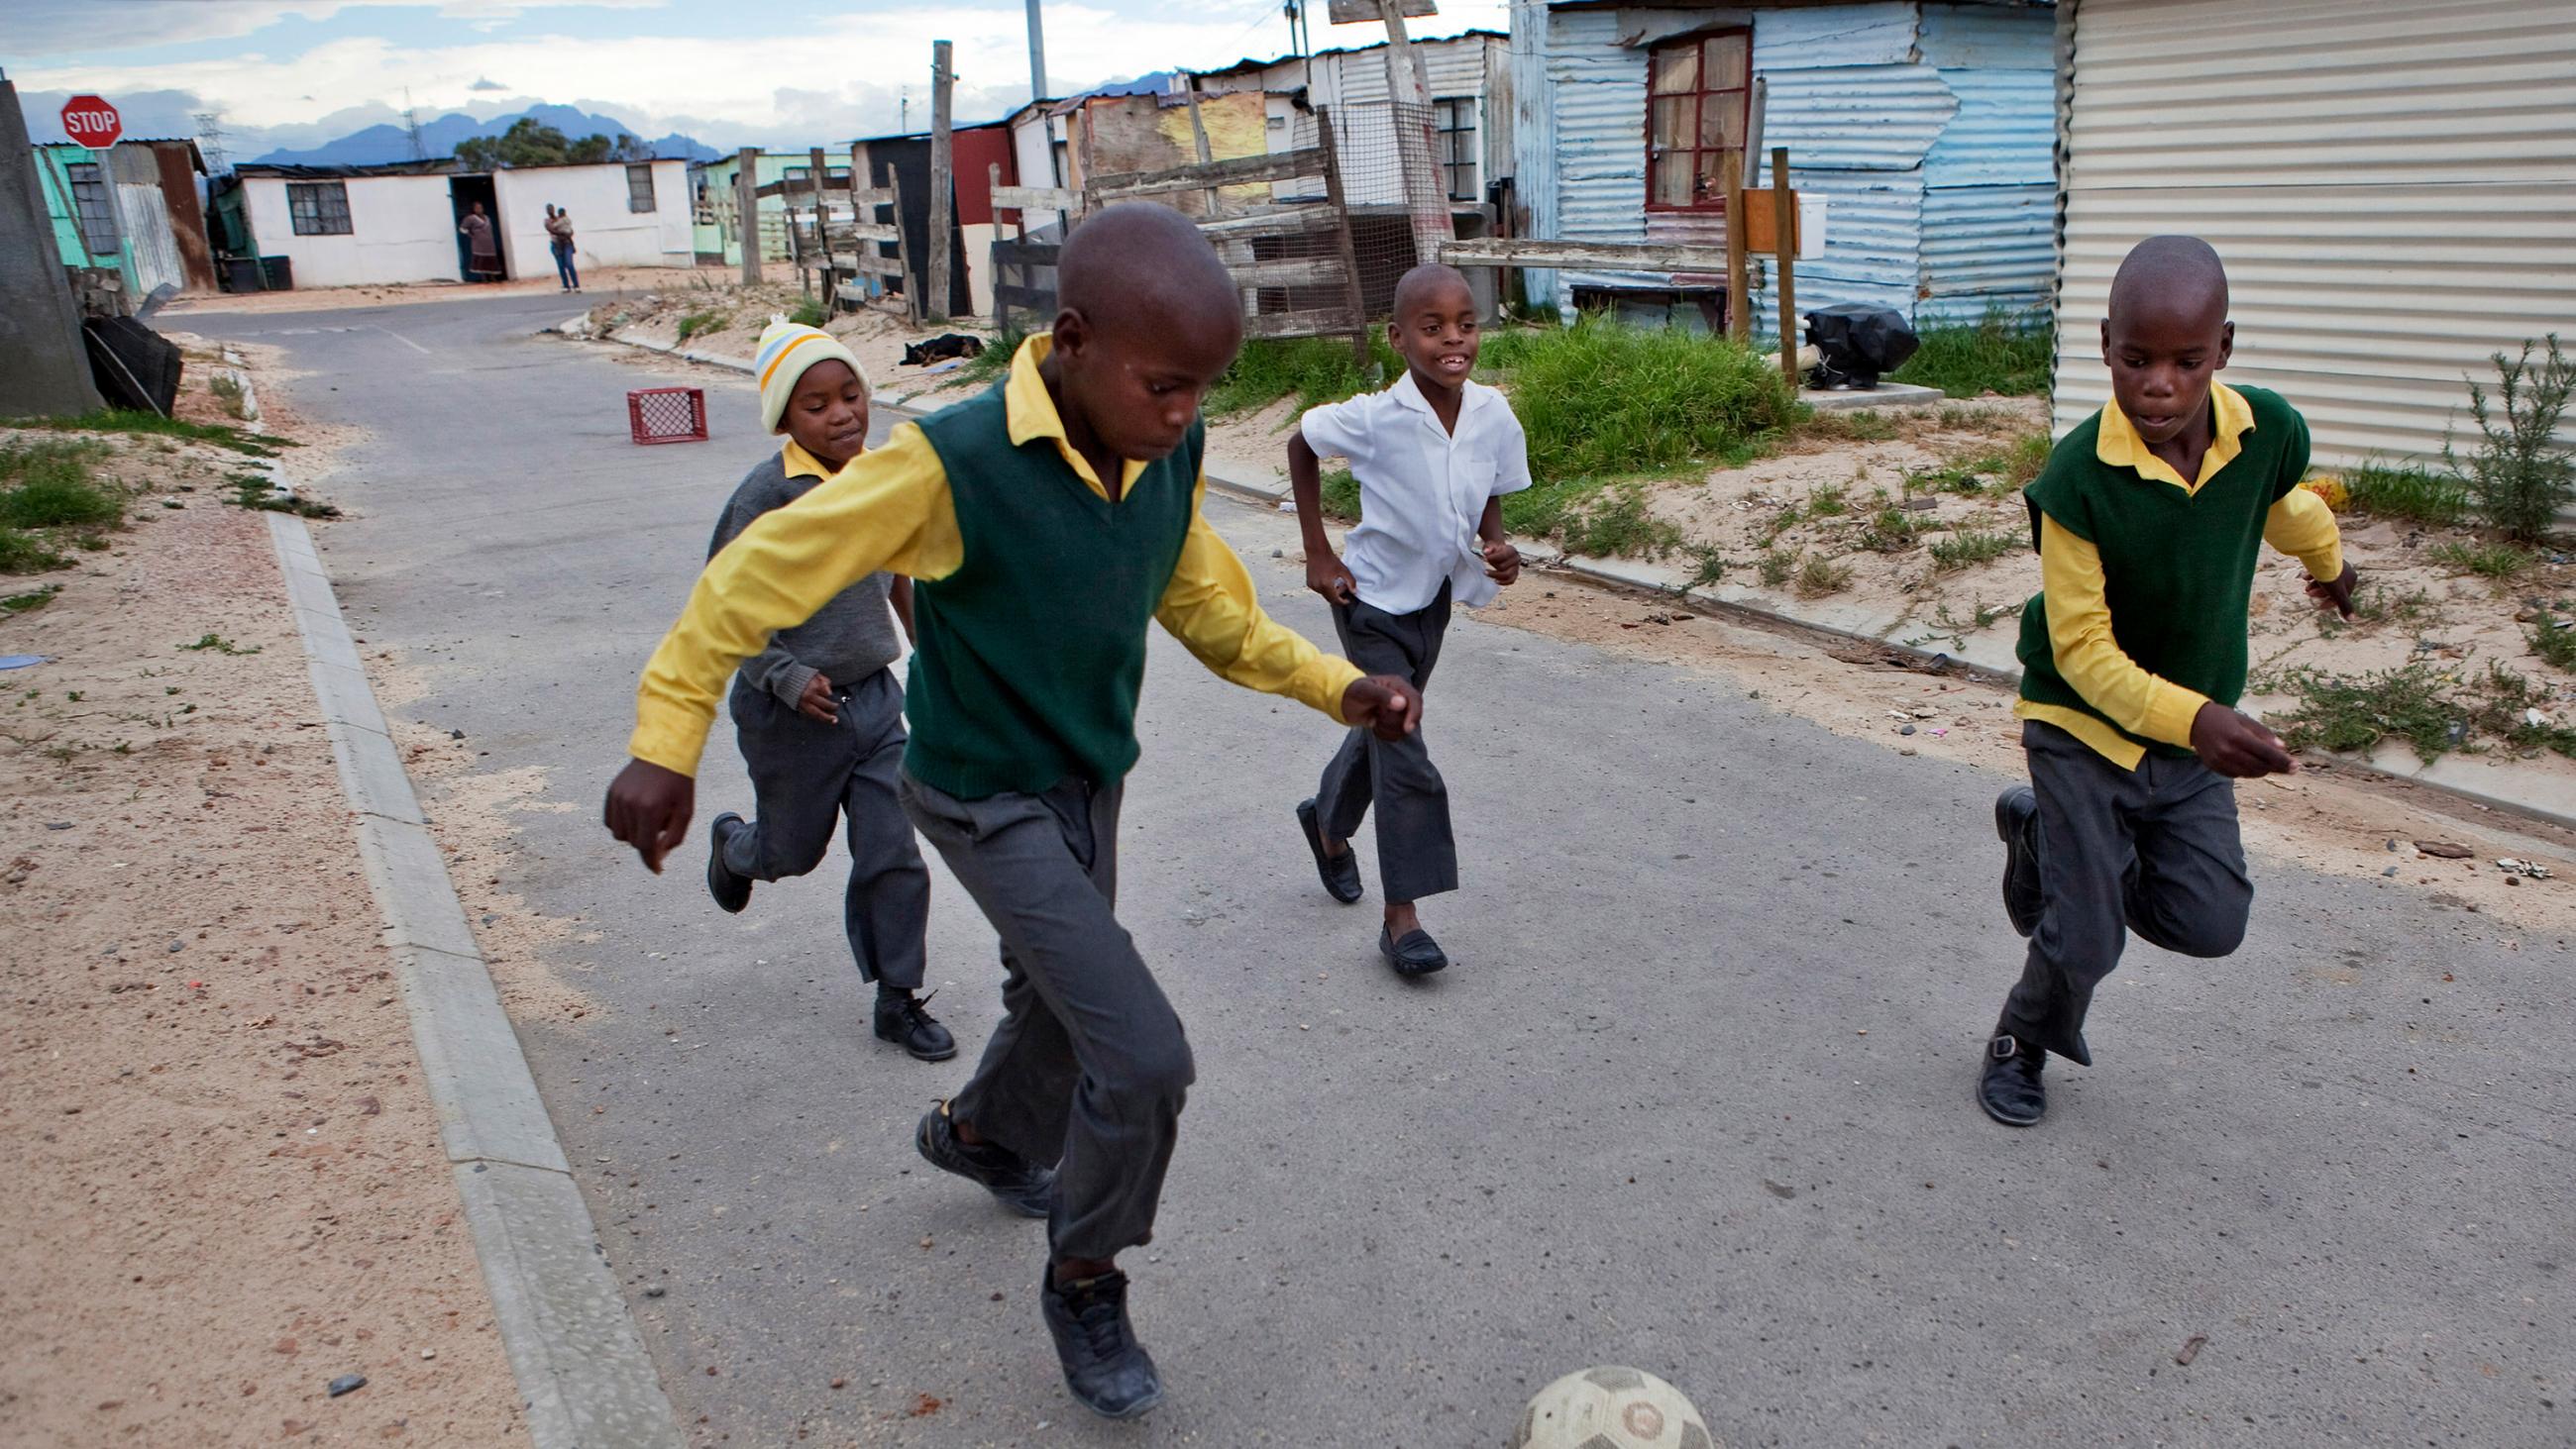 The picture shows a group of small boys running with a soccer ball. 